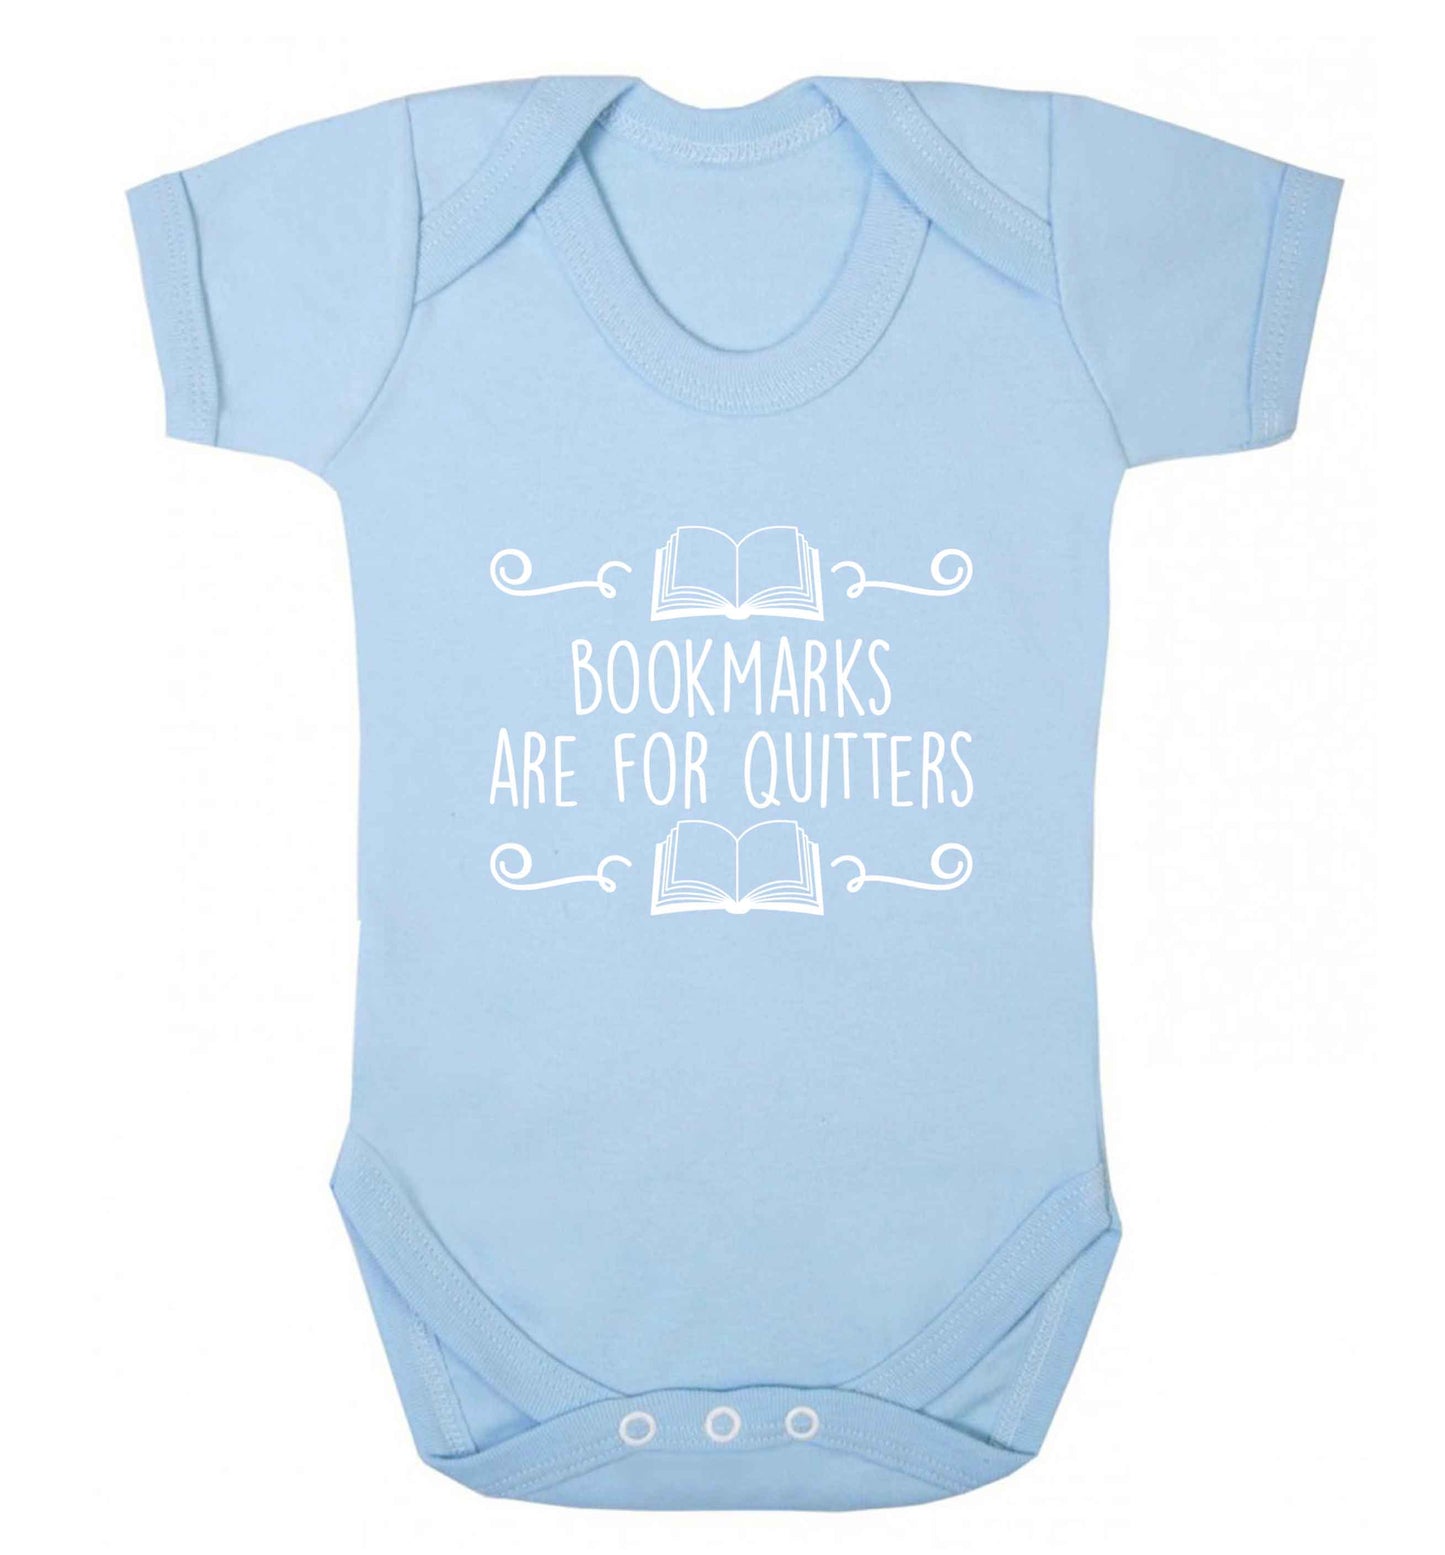 Bookmarks are for quitters baby vest pale blue 18-24 months